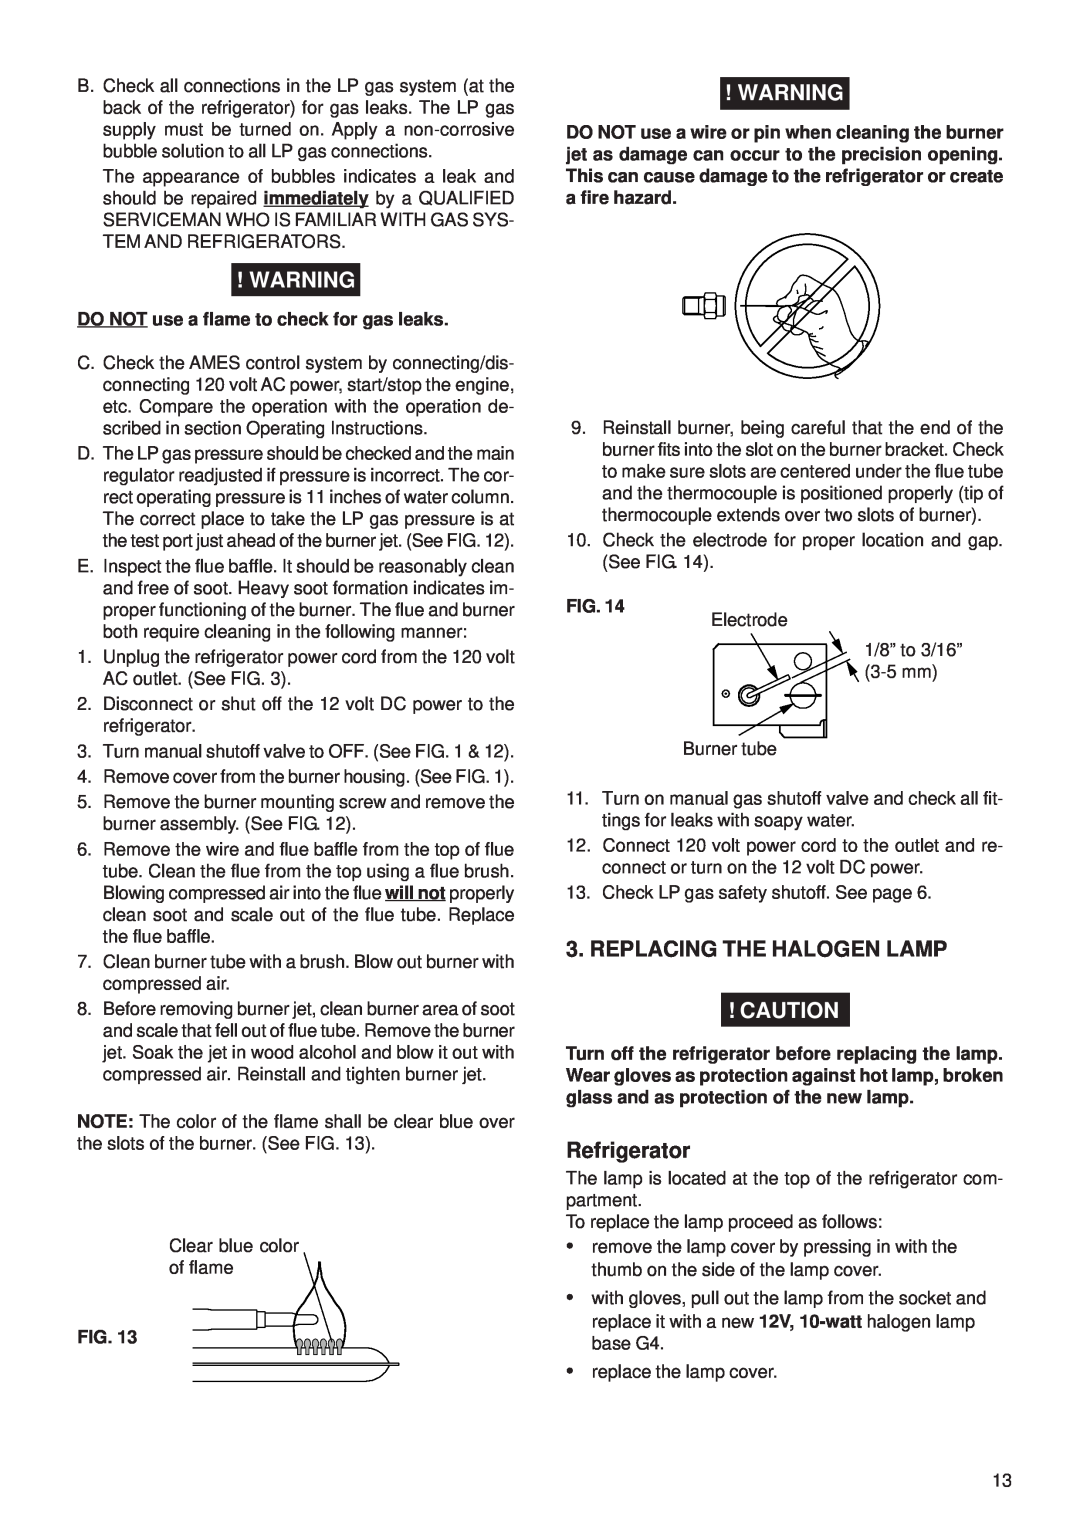 Dometic NDR1062 manual Replacing The Halogen Lamp, Refrigerator, DO NOT use a flame to check for gas leaks 